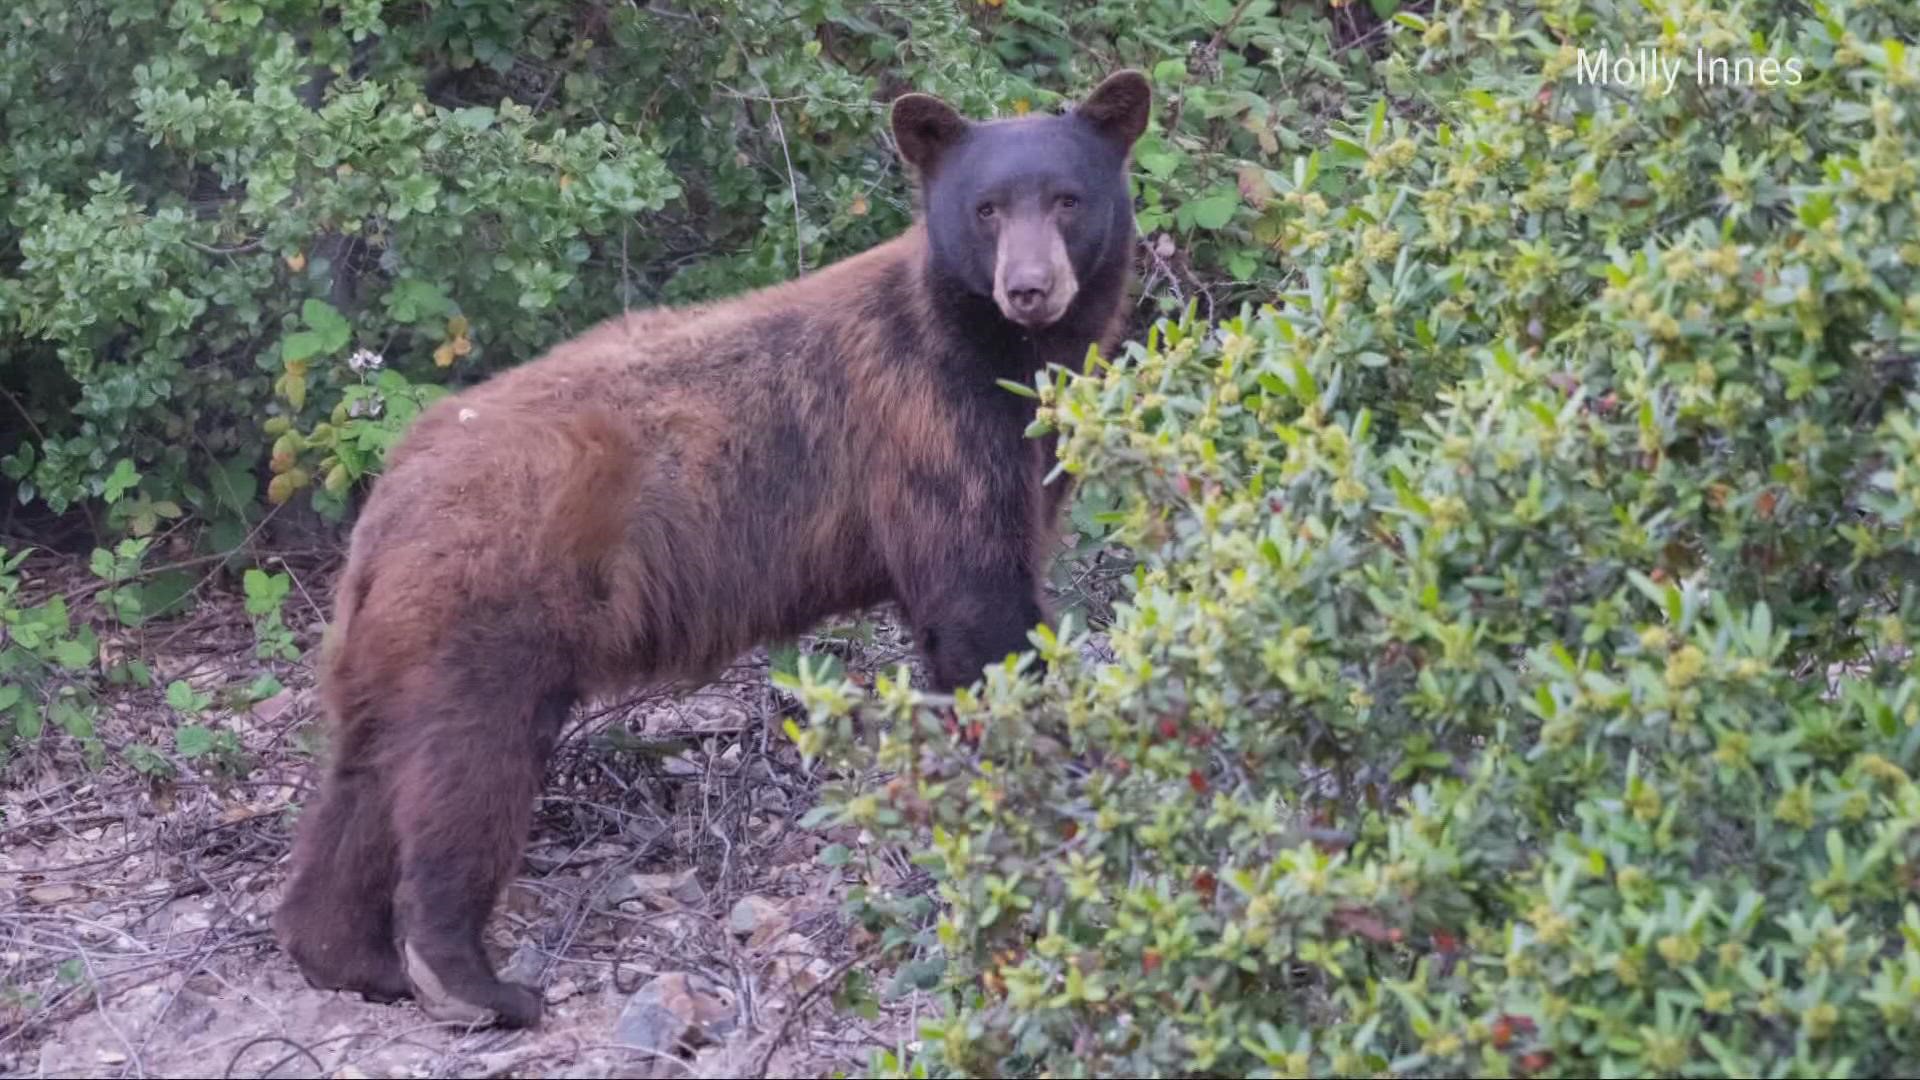 A bear has been spotted on several home security cameras in Fairfield, wildlife experts explain why the bear might have roamed into residential areas.